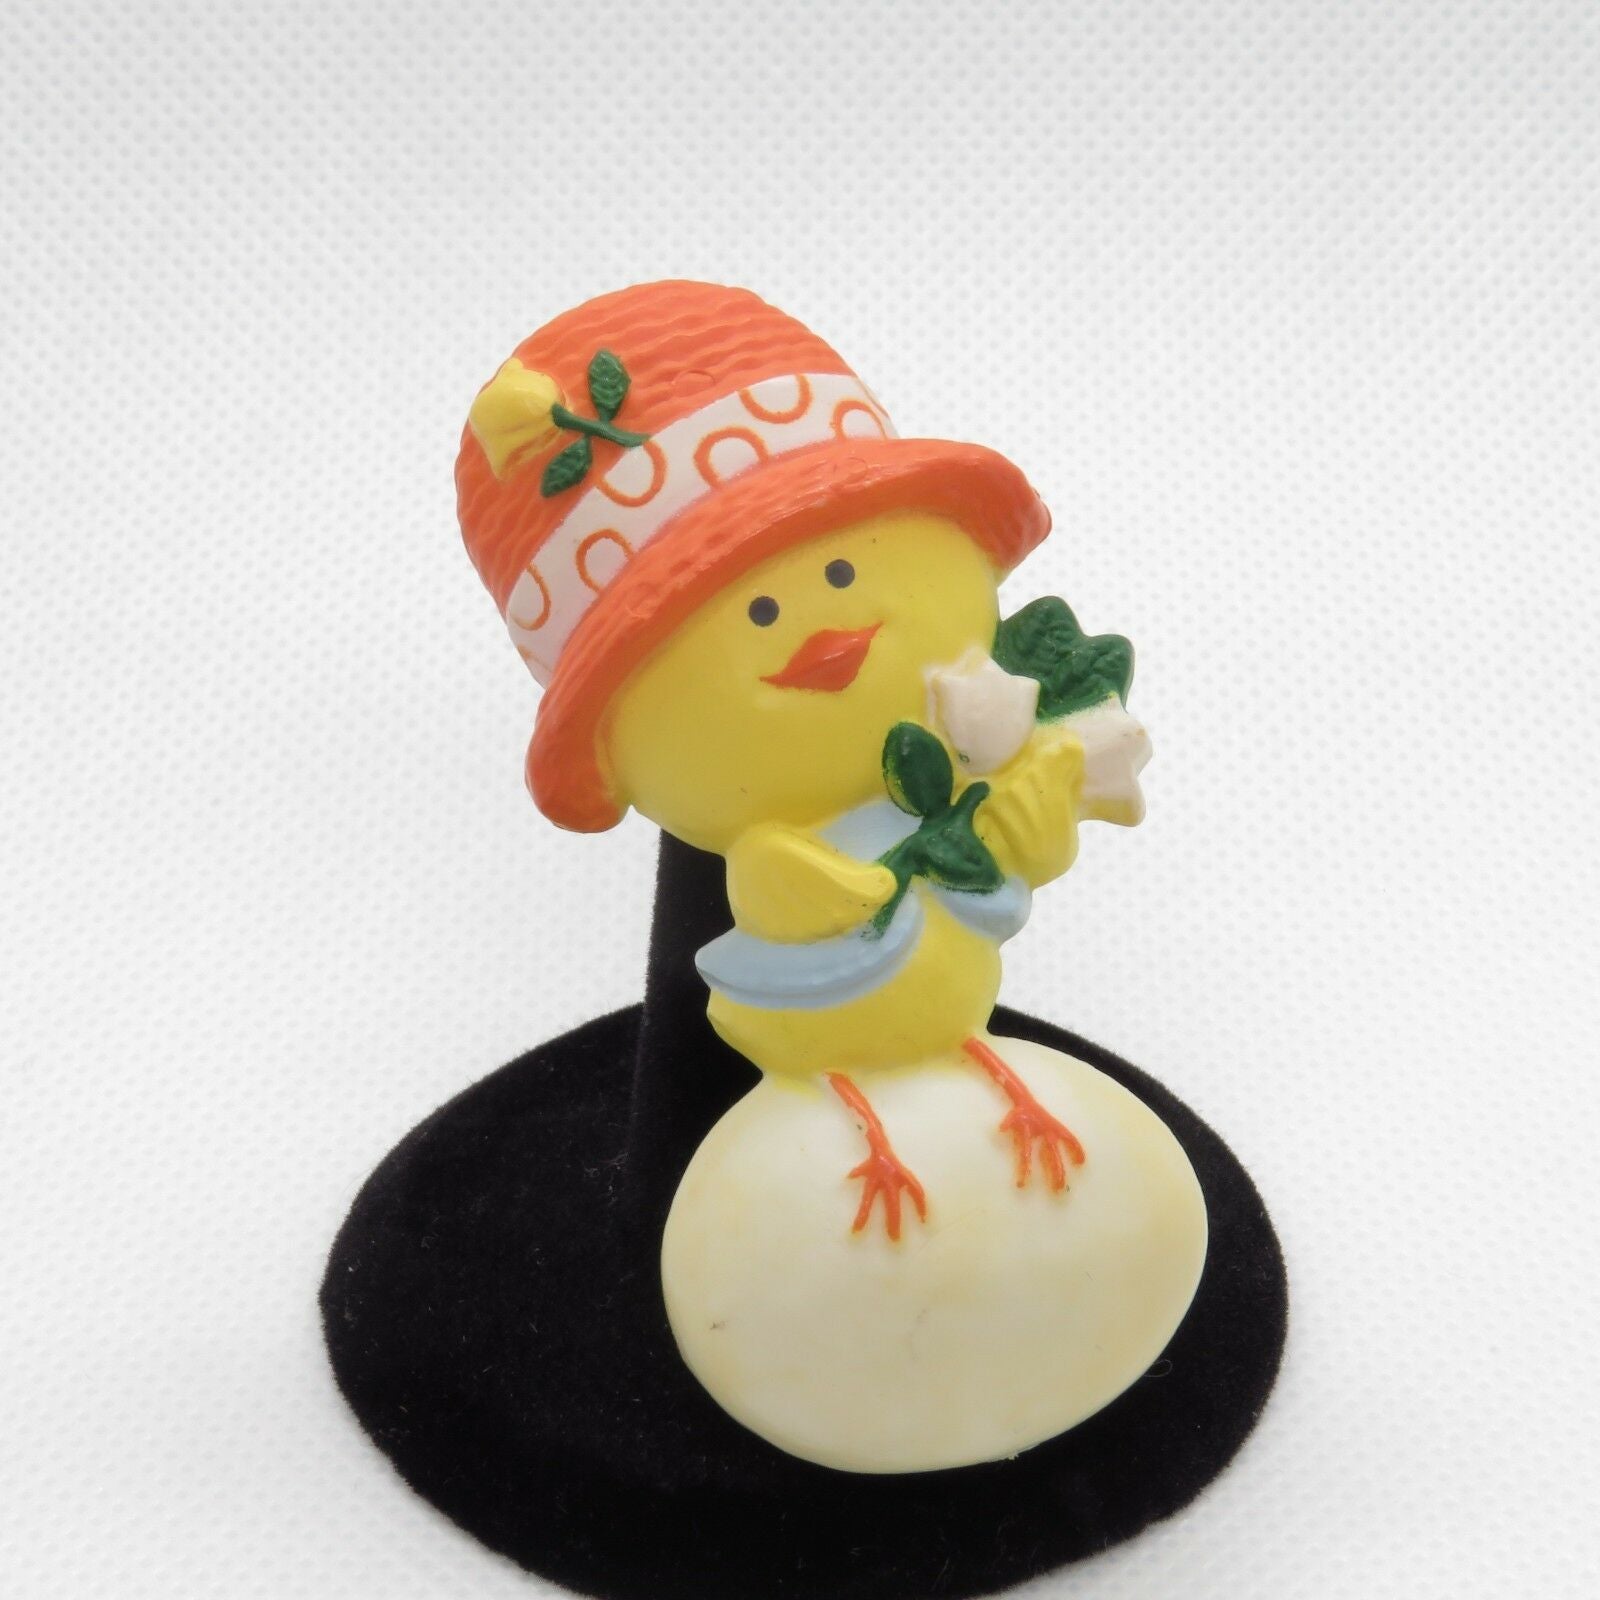 Chick Chicken Egg Easter Pin Brooch Hallmark Vintage 1975 Bonnet Jewelry - At Grandma's Table